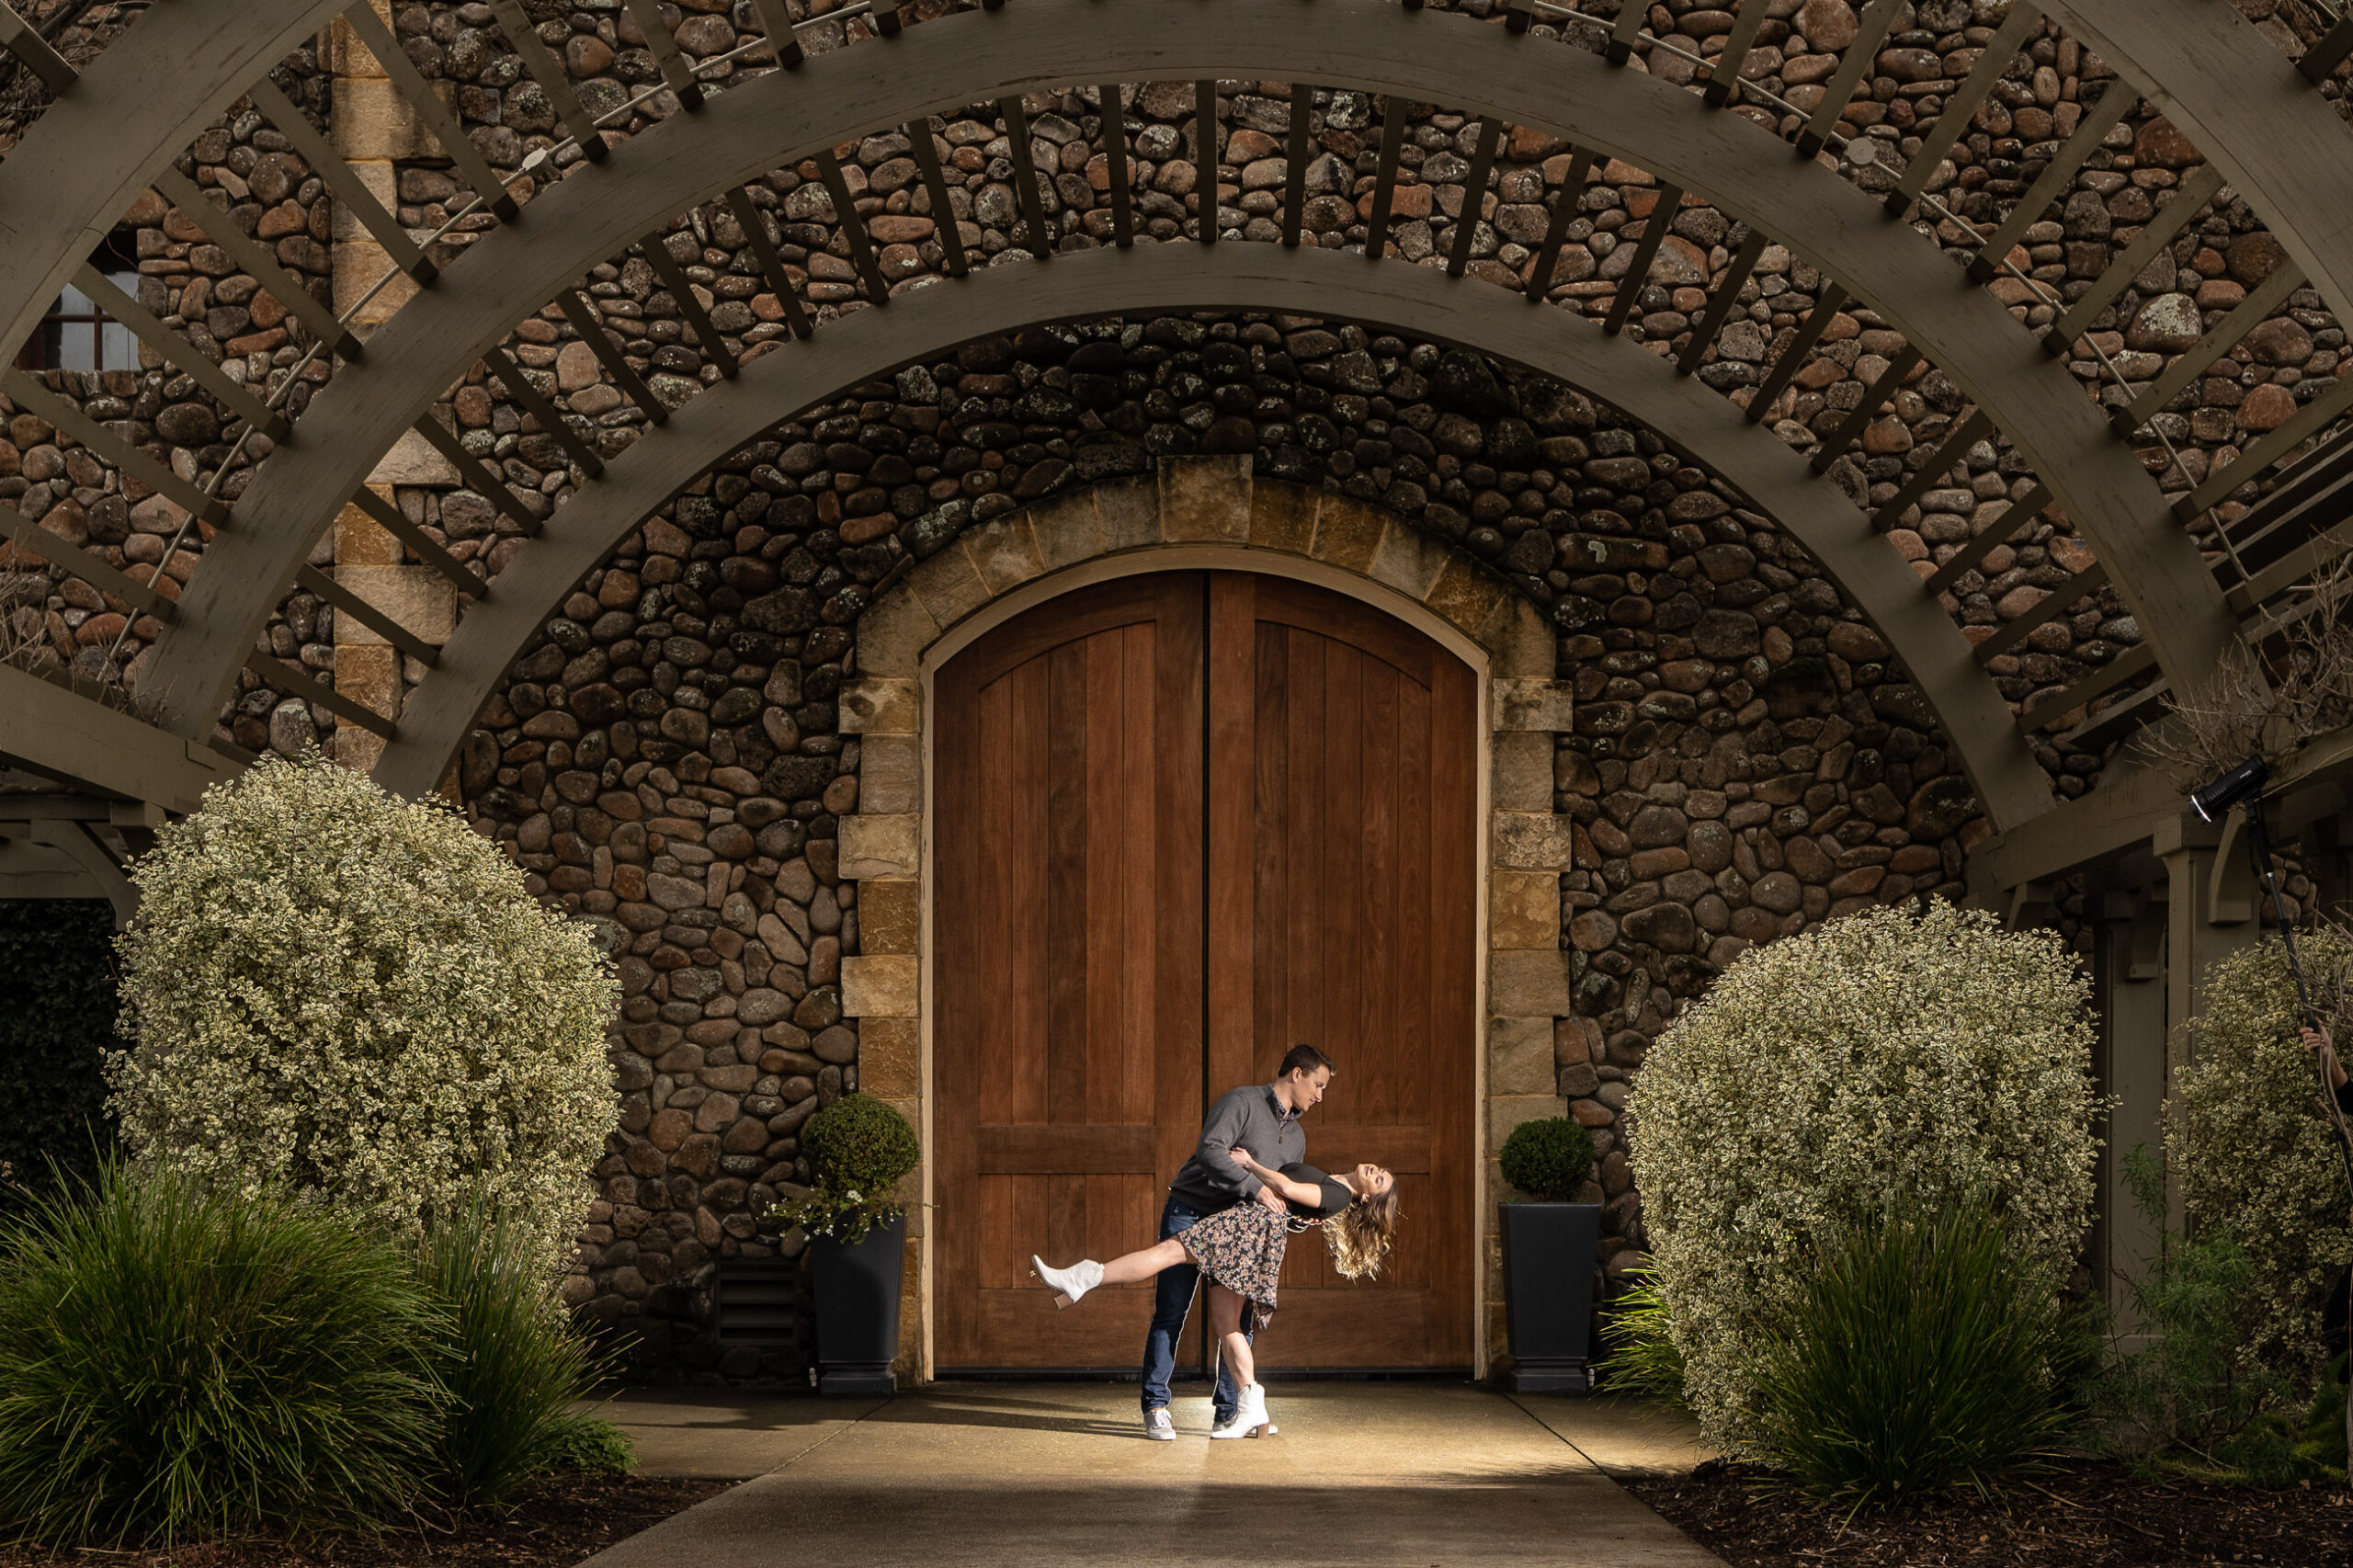 A couple poses in a dance dip under a large stone archway with wooden doors and greenery surrounding them.